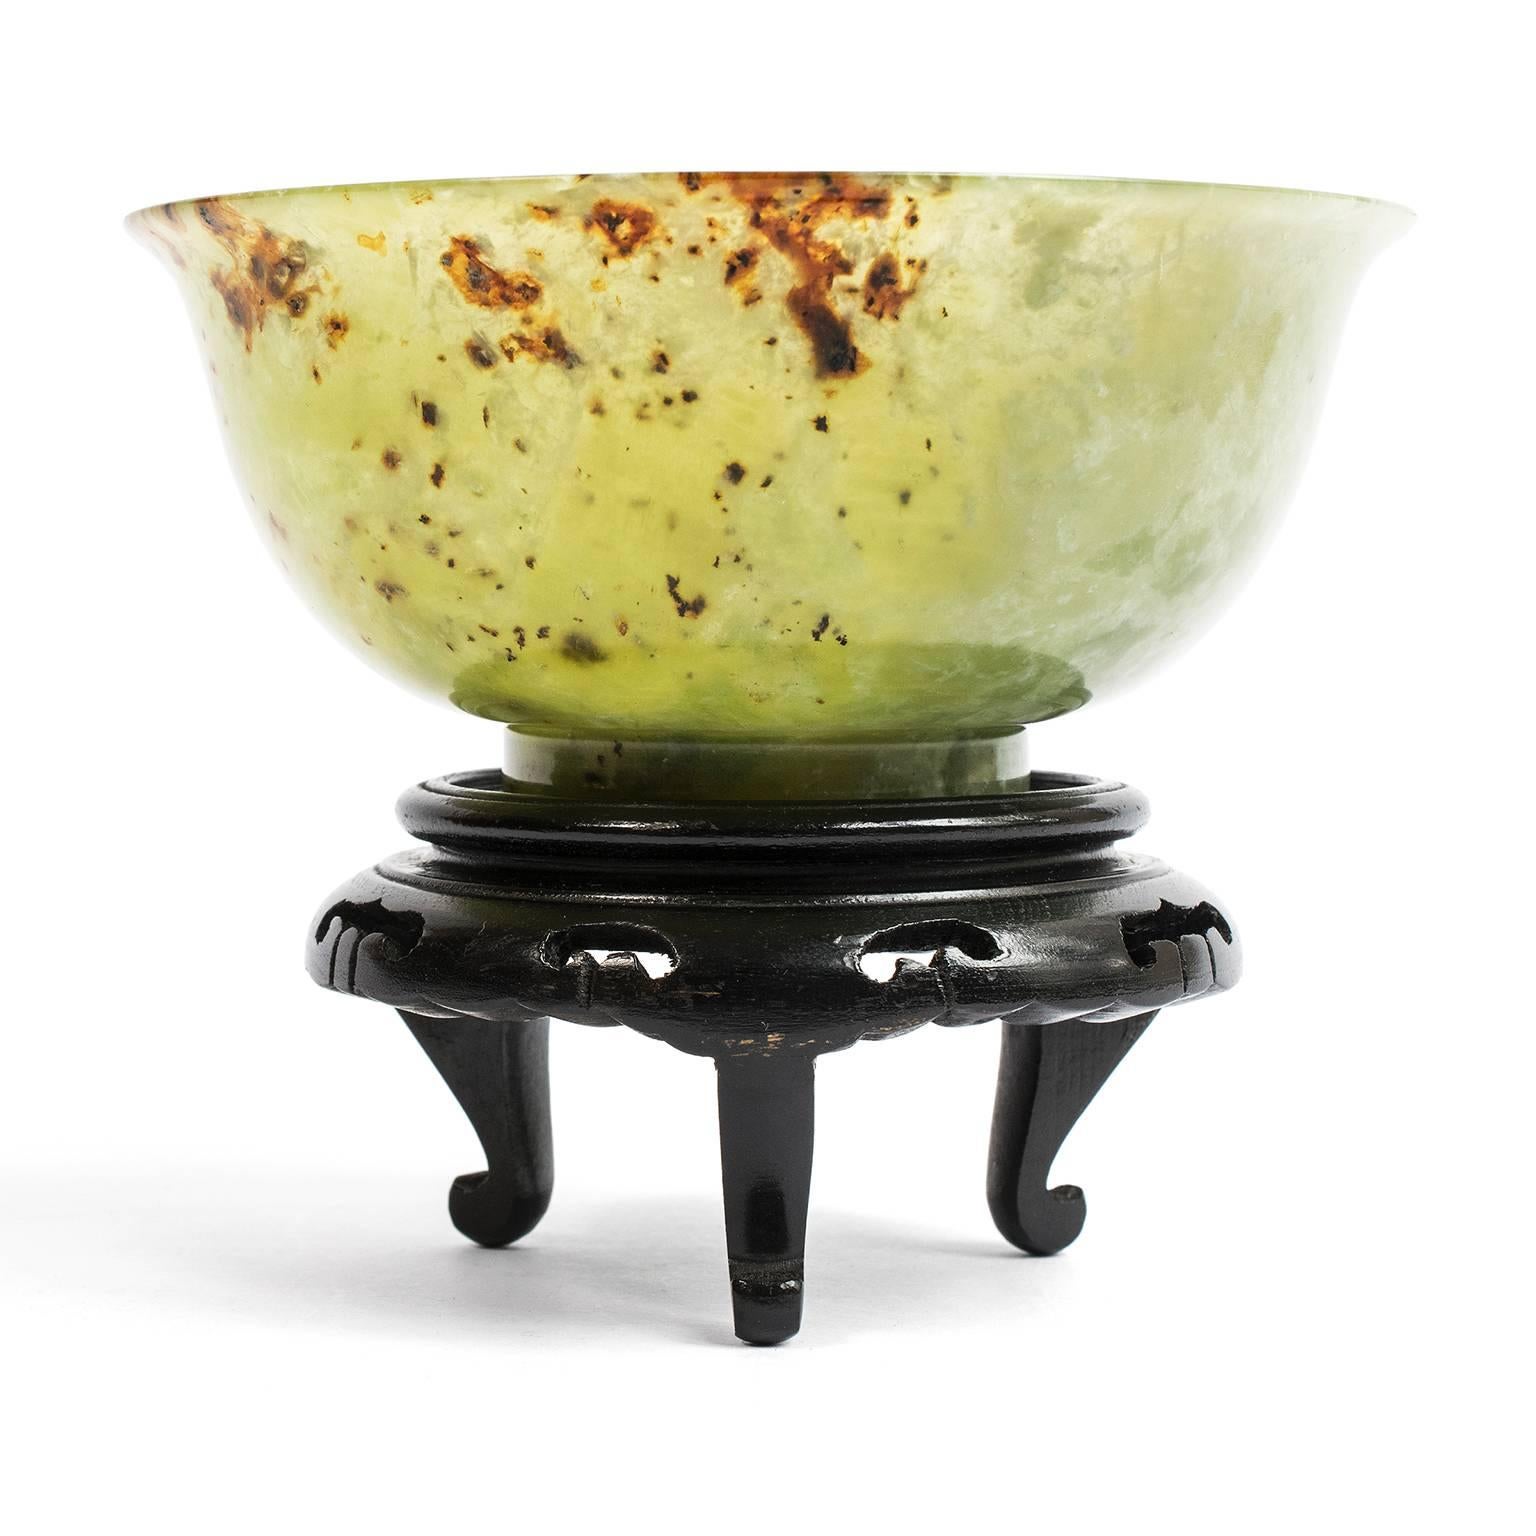 The “spinach green” jade from which this finely shaped bowl was carved has natural russet inclusions offering added beauty and depth to the rich color of this prized stone native to Siberia. This particular jade was a popular import to China during